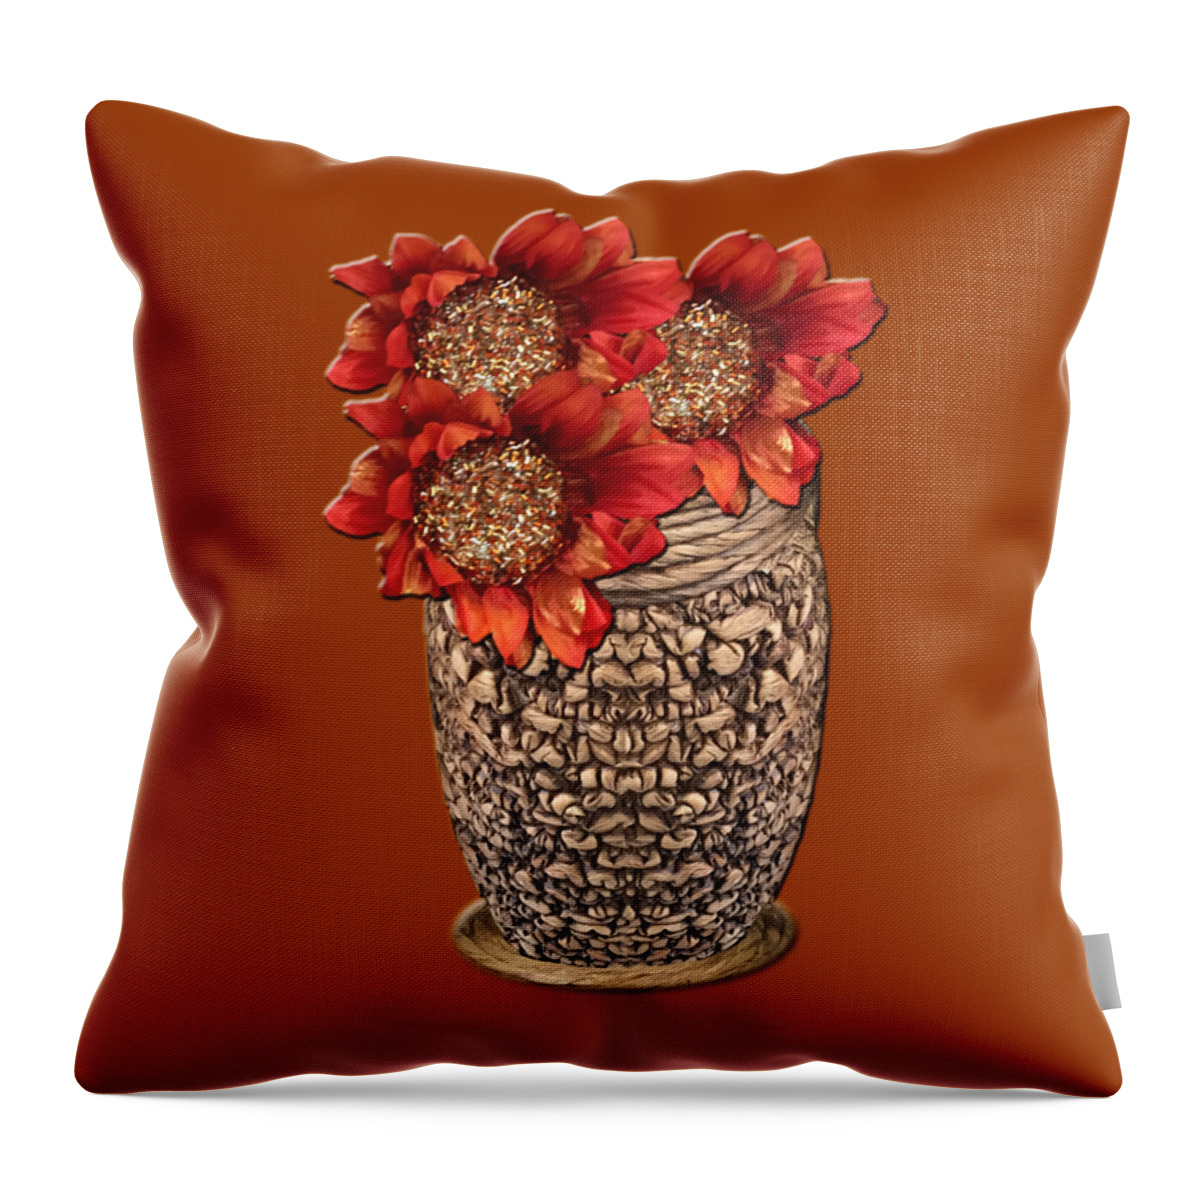 Fire Brick Throw Pillow featuring the photograph Fire Brick Flora Vase by Rockin Docks Deluxephotos